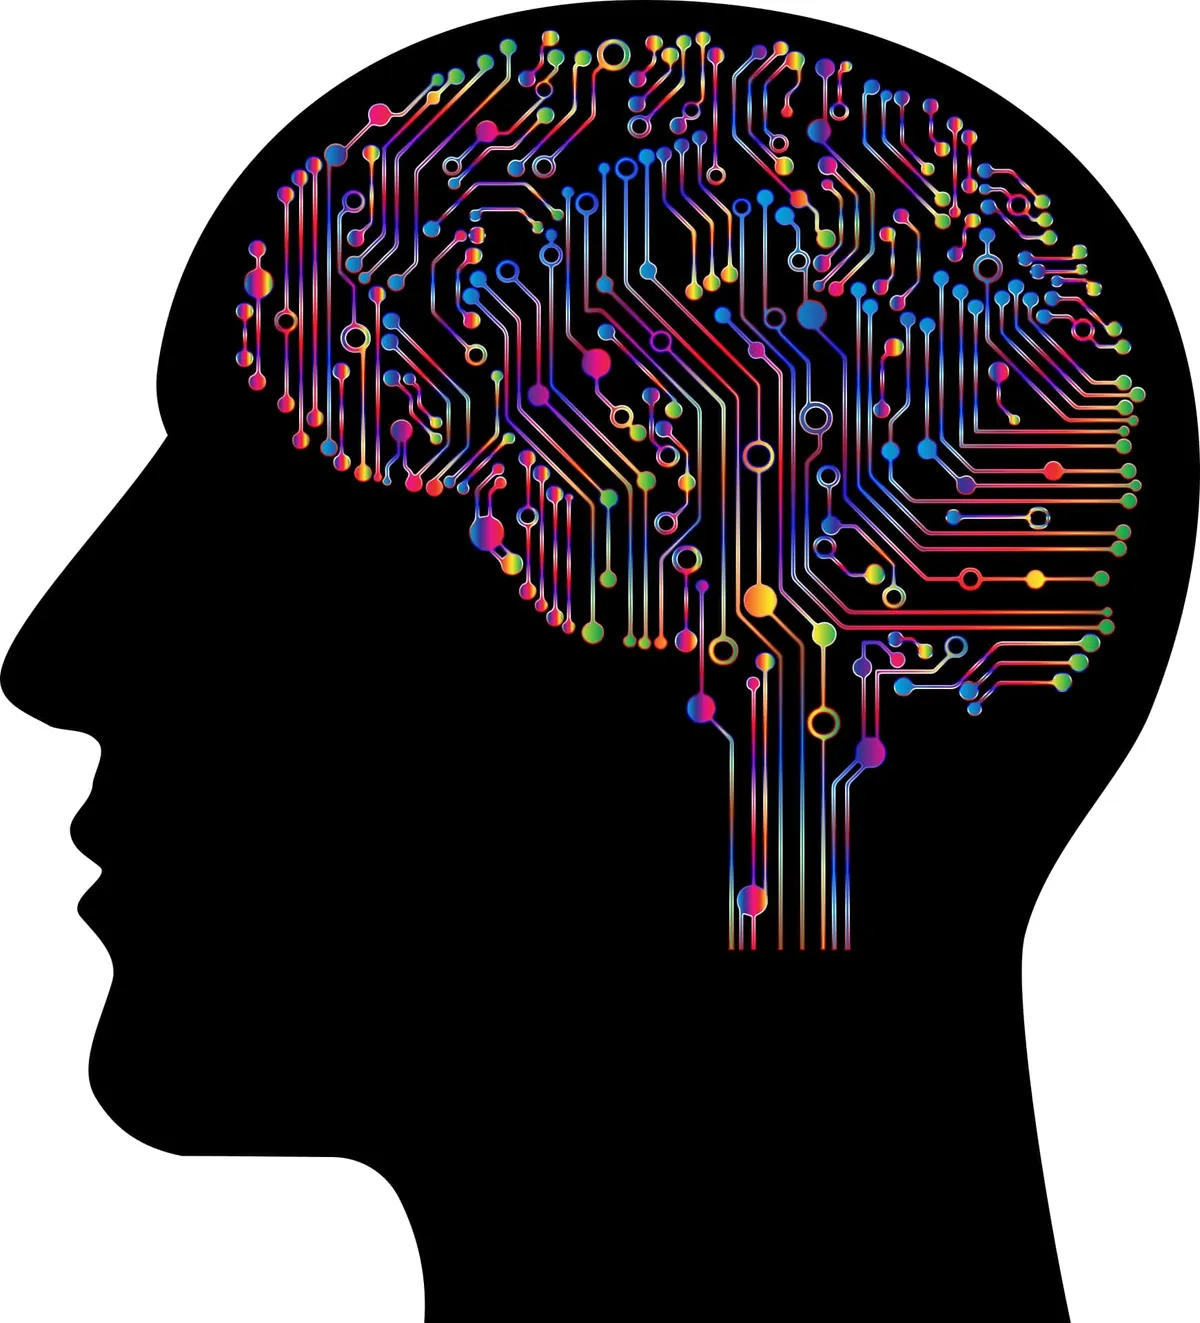 A silhouette of a human head in profile. Instead of a brain, there is circuitry.